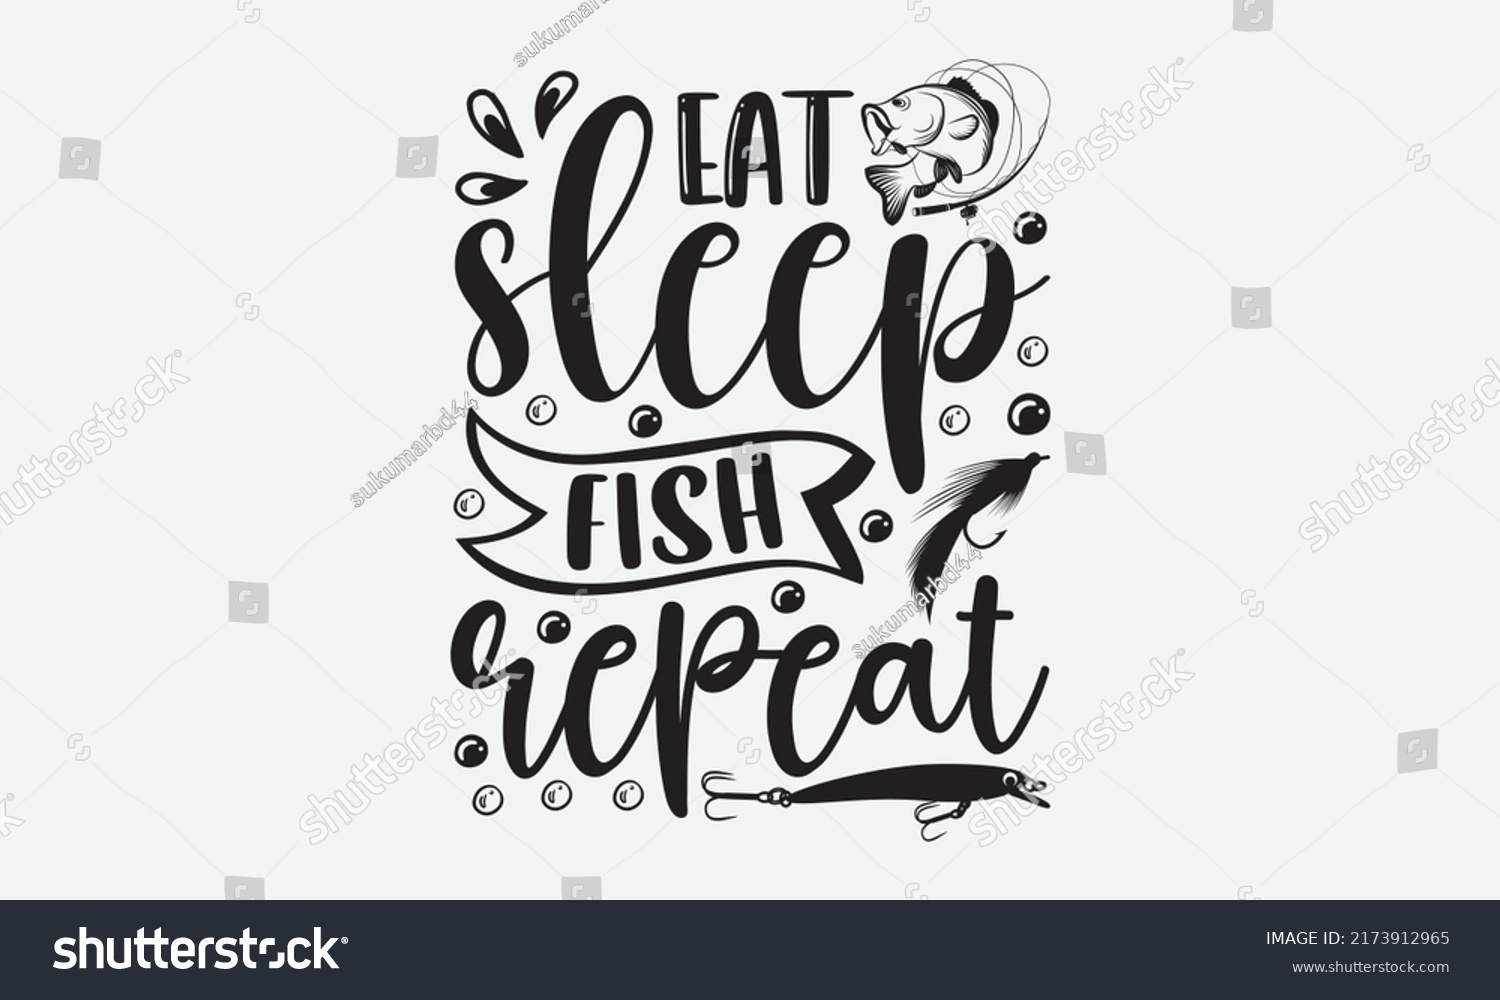 SVG of Eat sleep fish repeat - Fishing t shirt design, svg eps Files for Cutting, Handmade calligraphy vector illustration, Hand written vector sign, svg svg